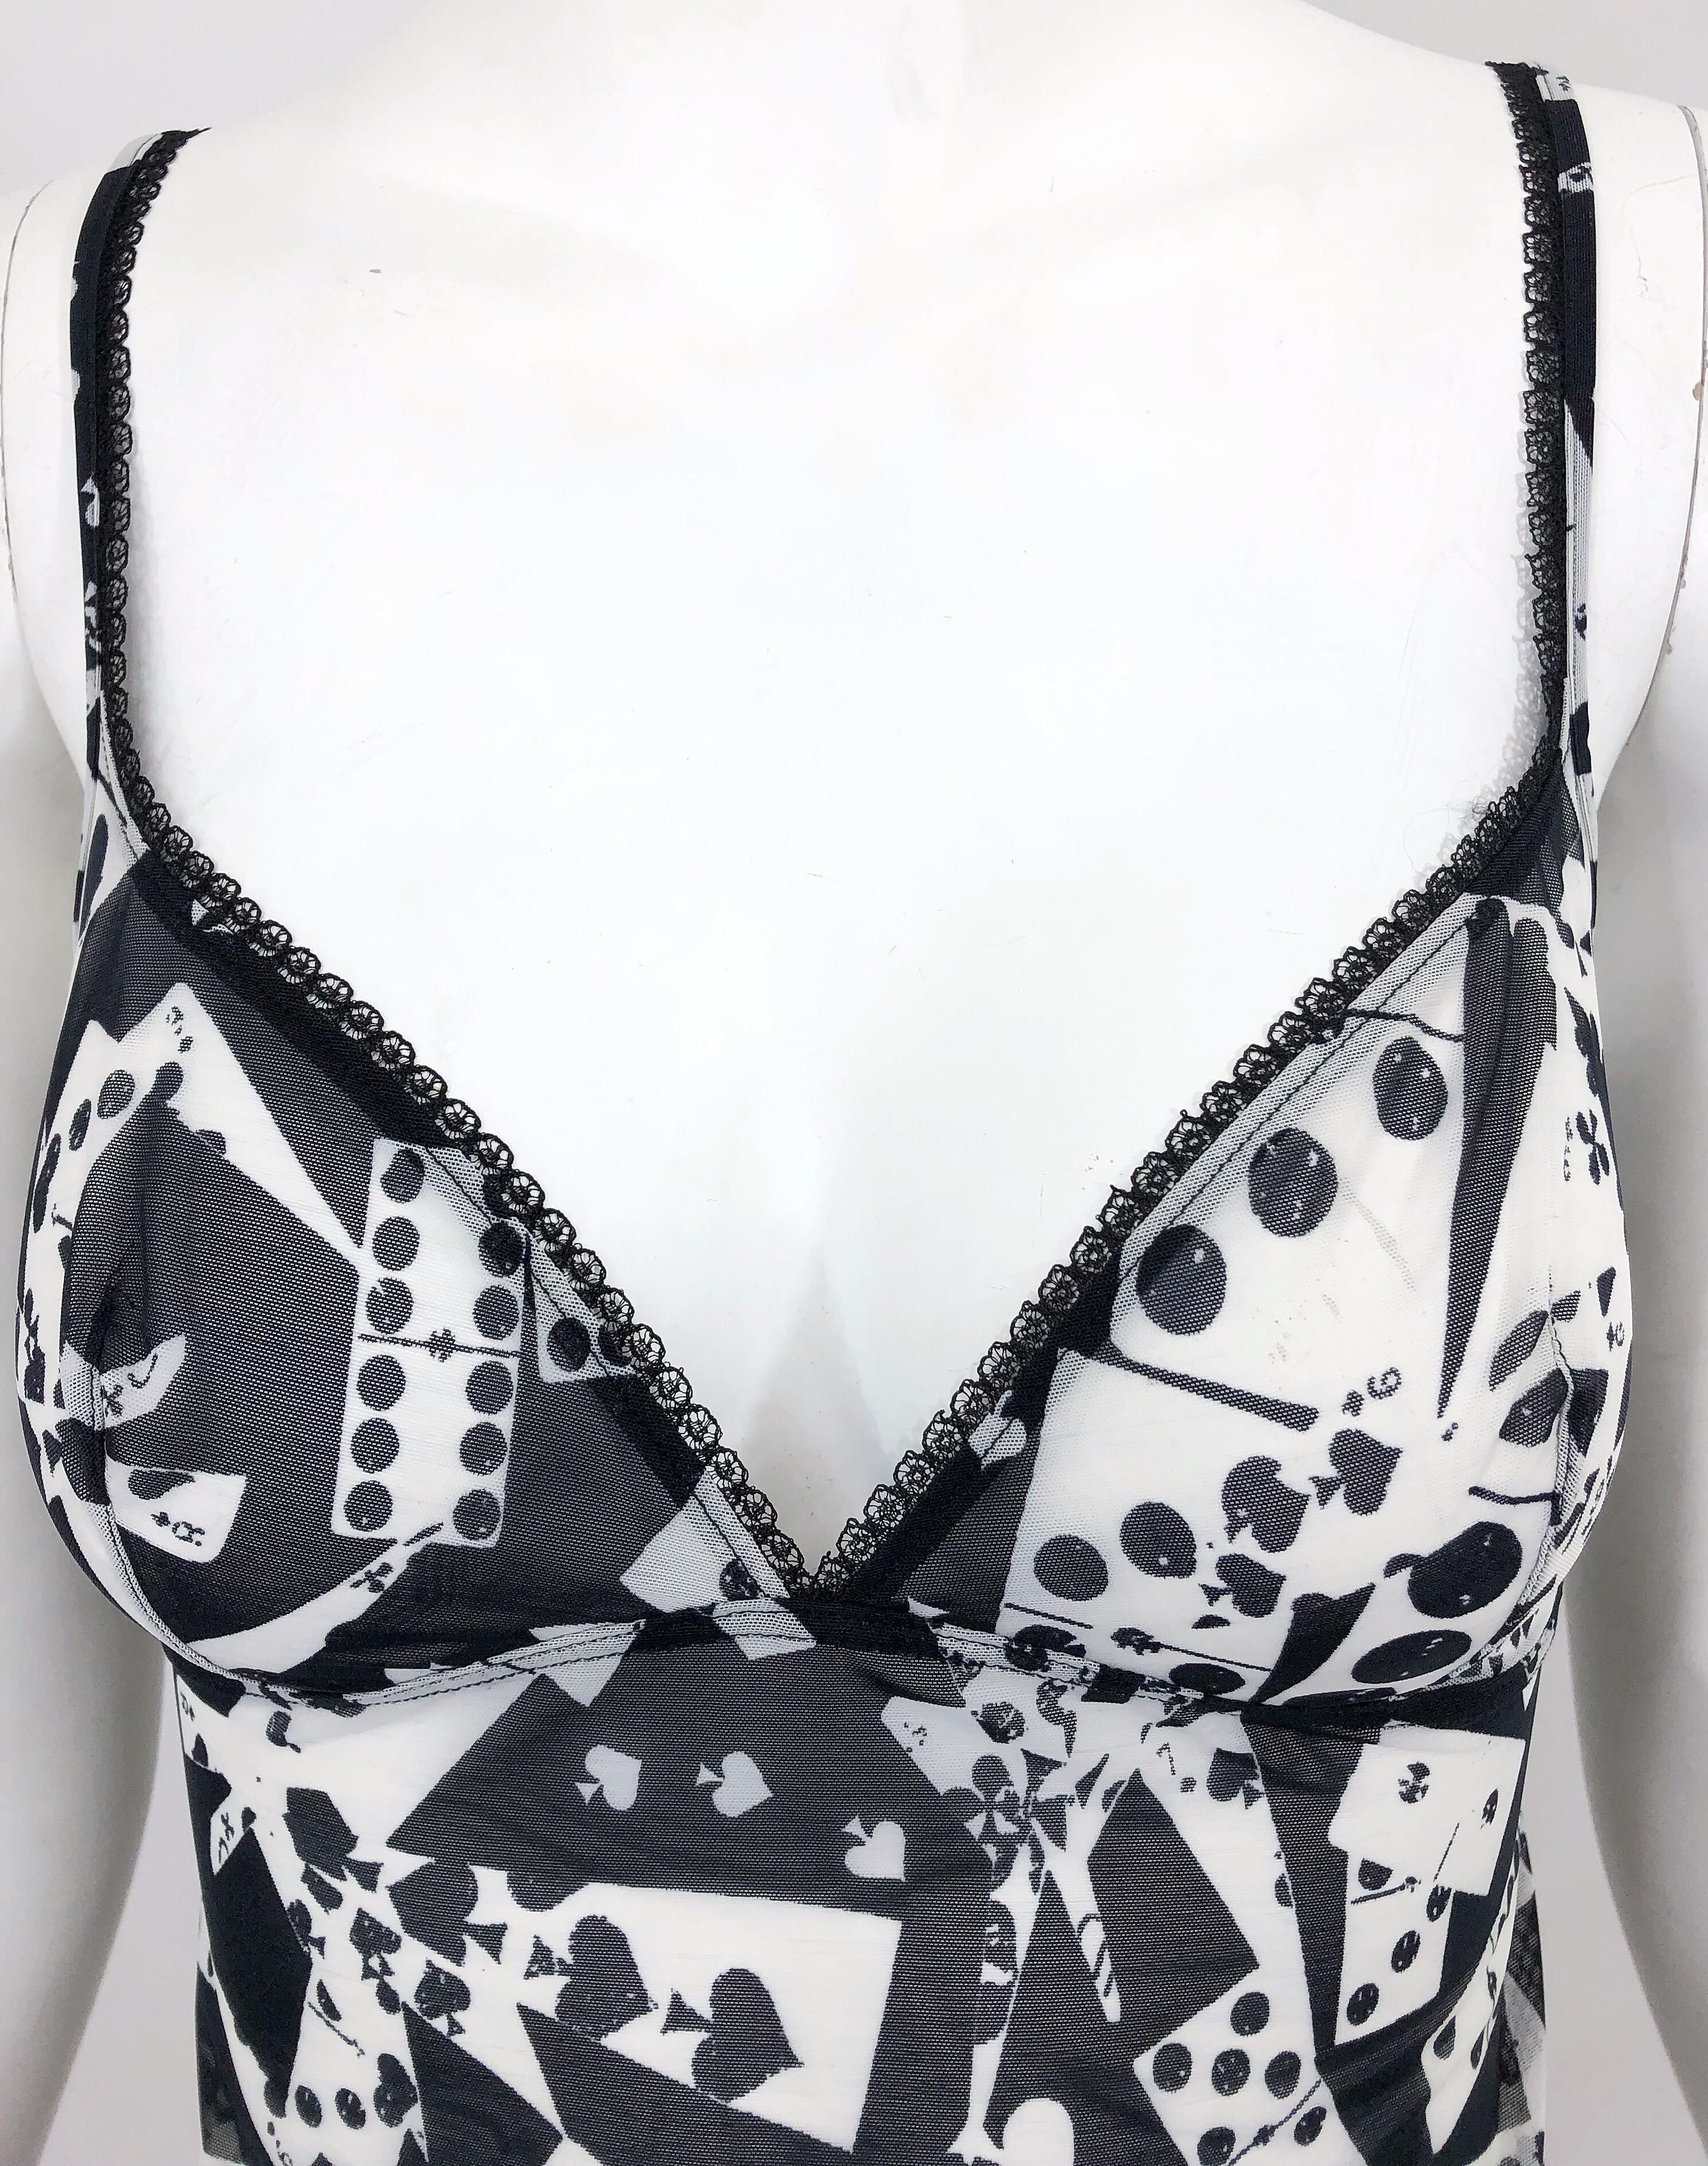 Christian Dior John Galliano Fall 2001 Black White Novelty Domino Print Cami Top In Excellent Condition For Sale In San Diego, CA